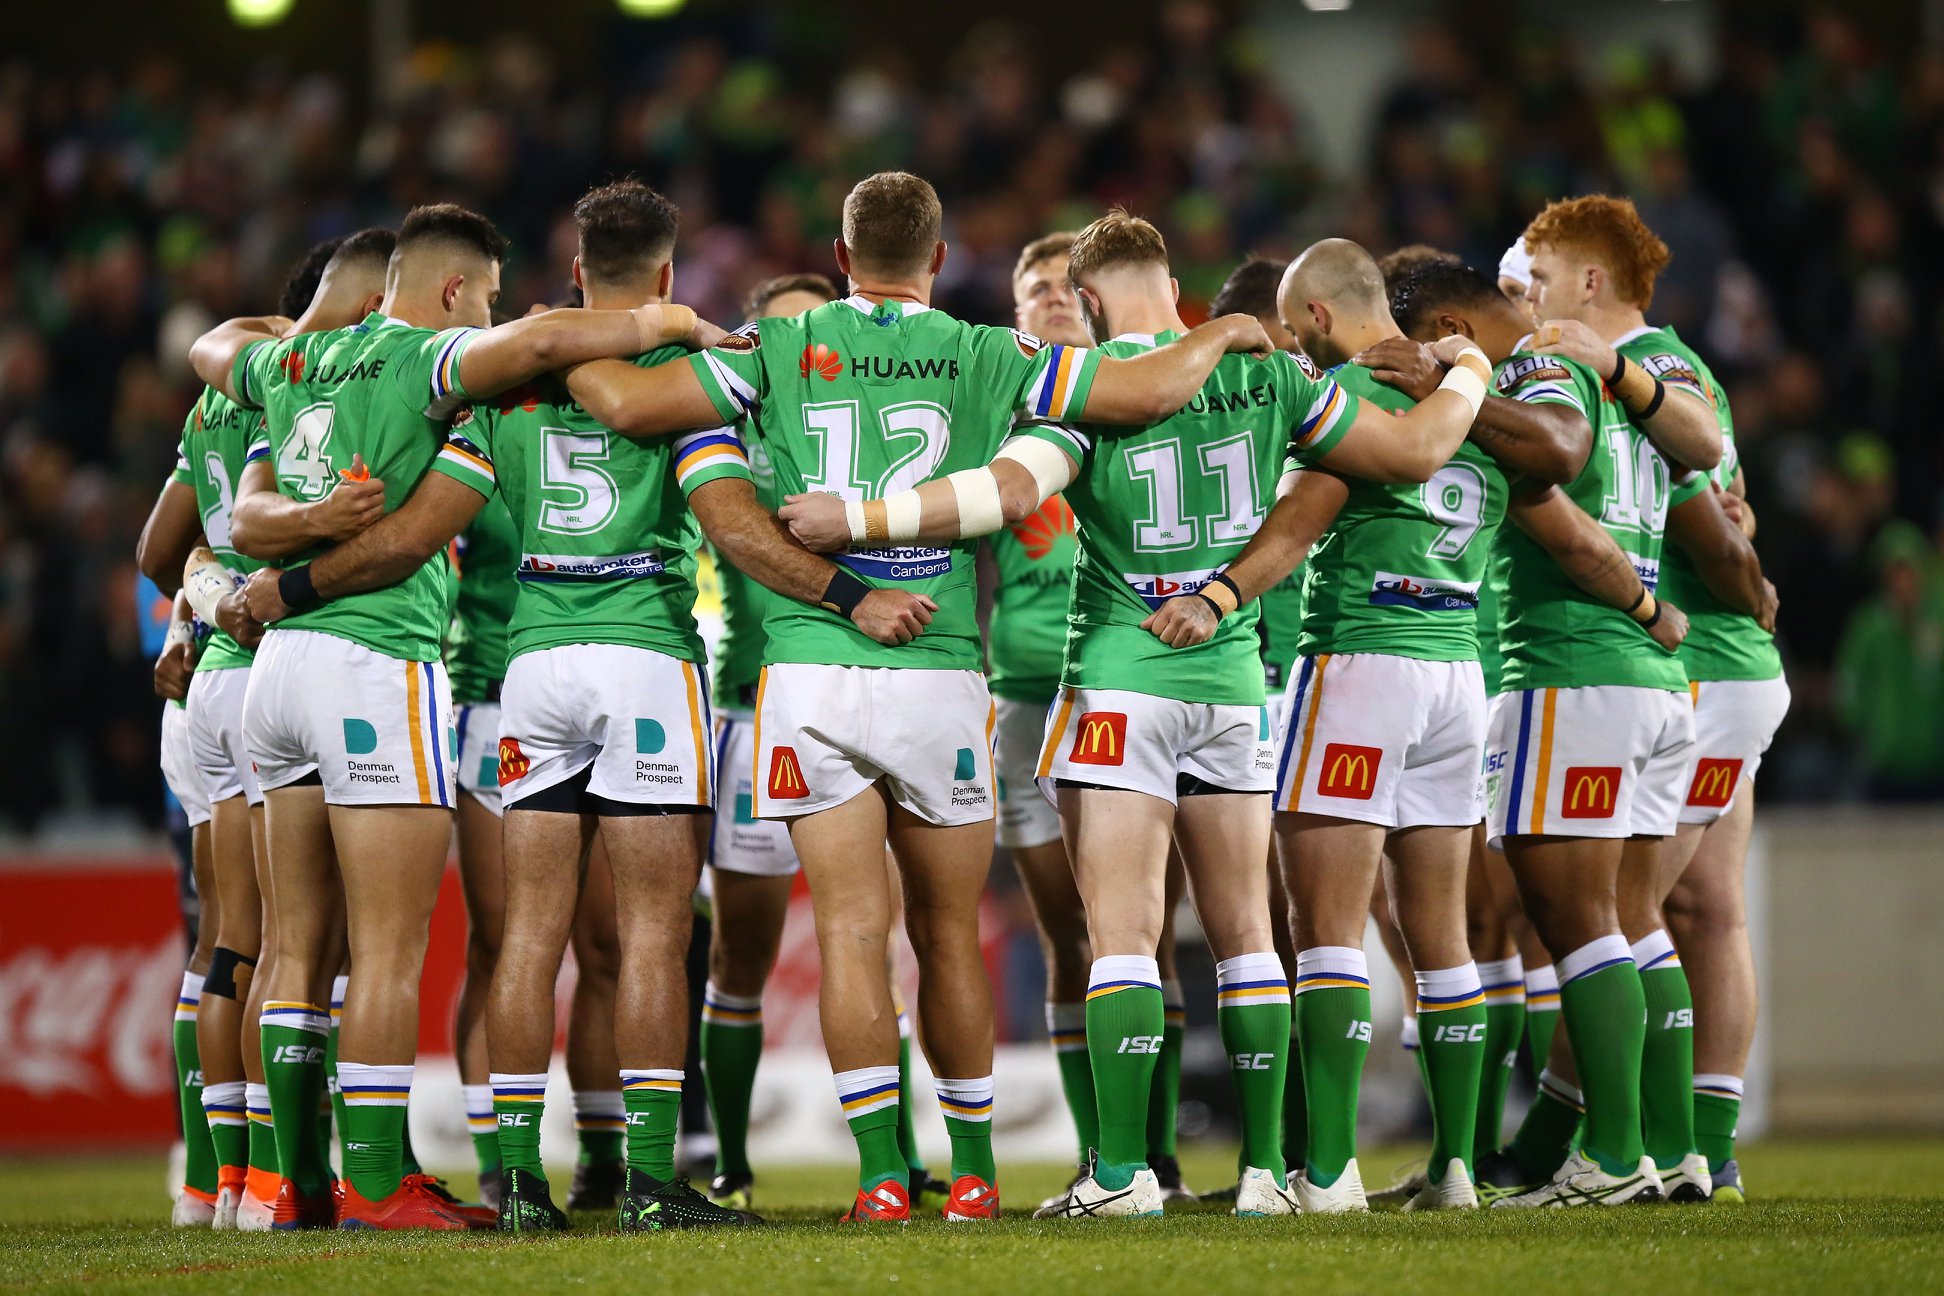 The similarities between the Canberra Raiders and the GWS Giants